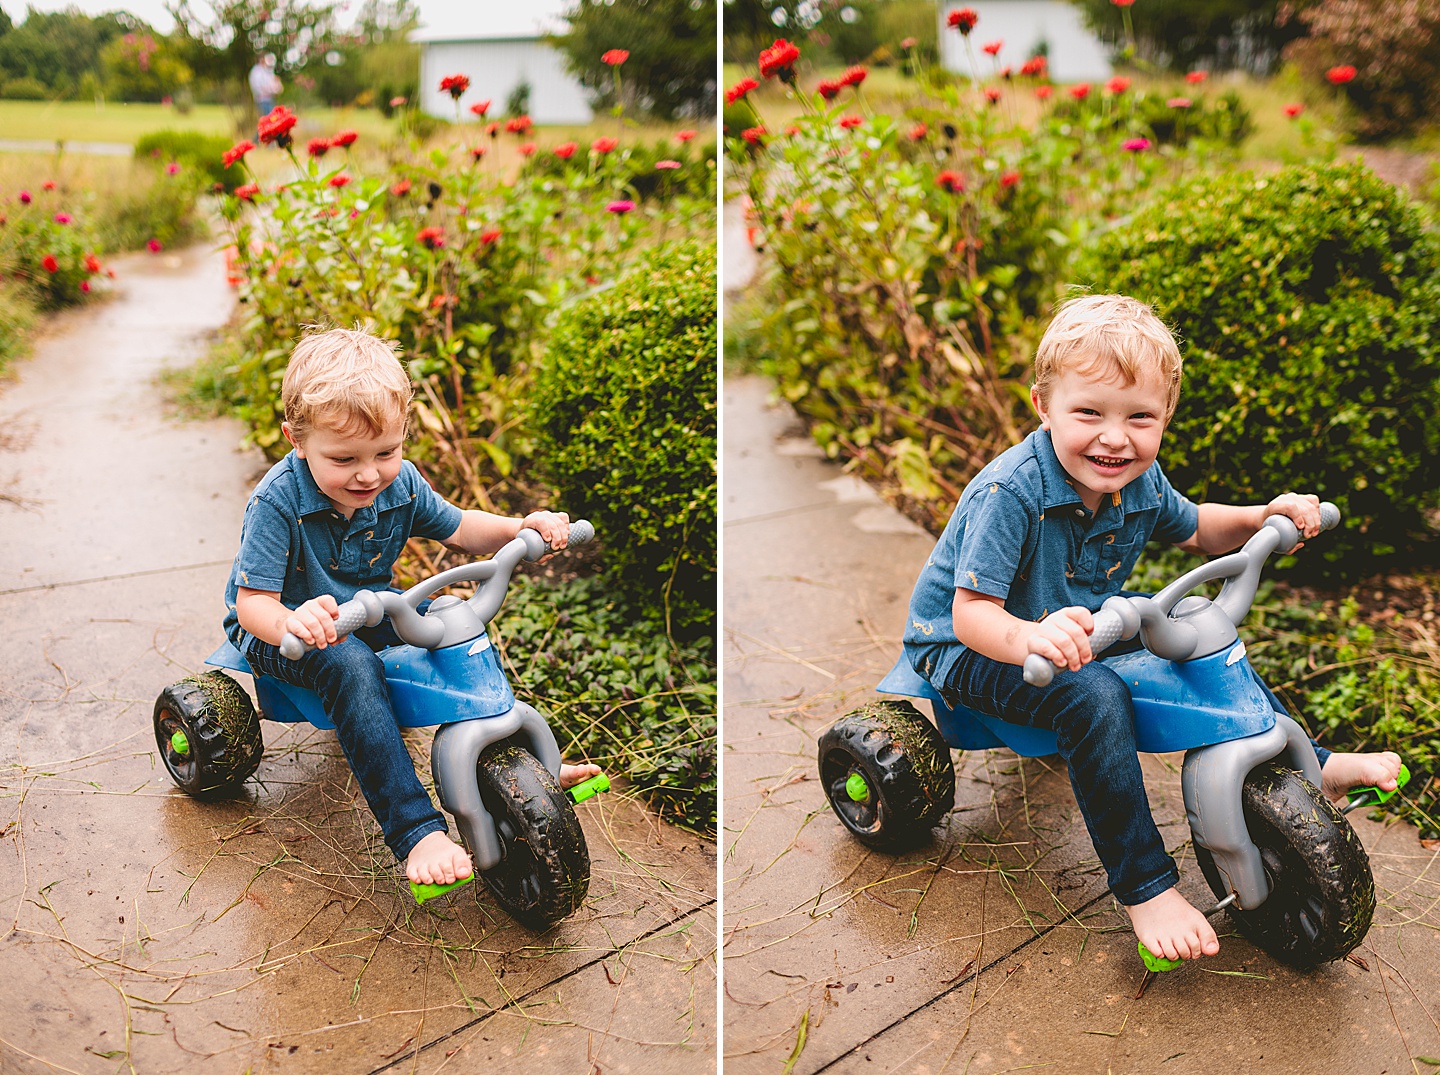 Photograph of kid riding tricycle down driveway